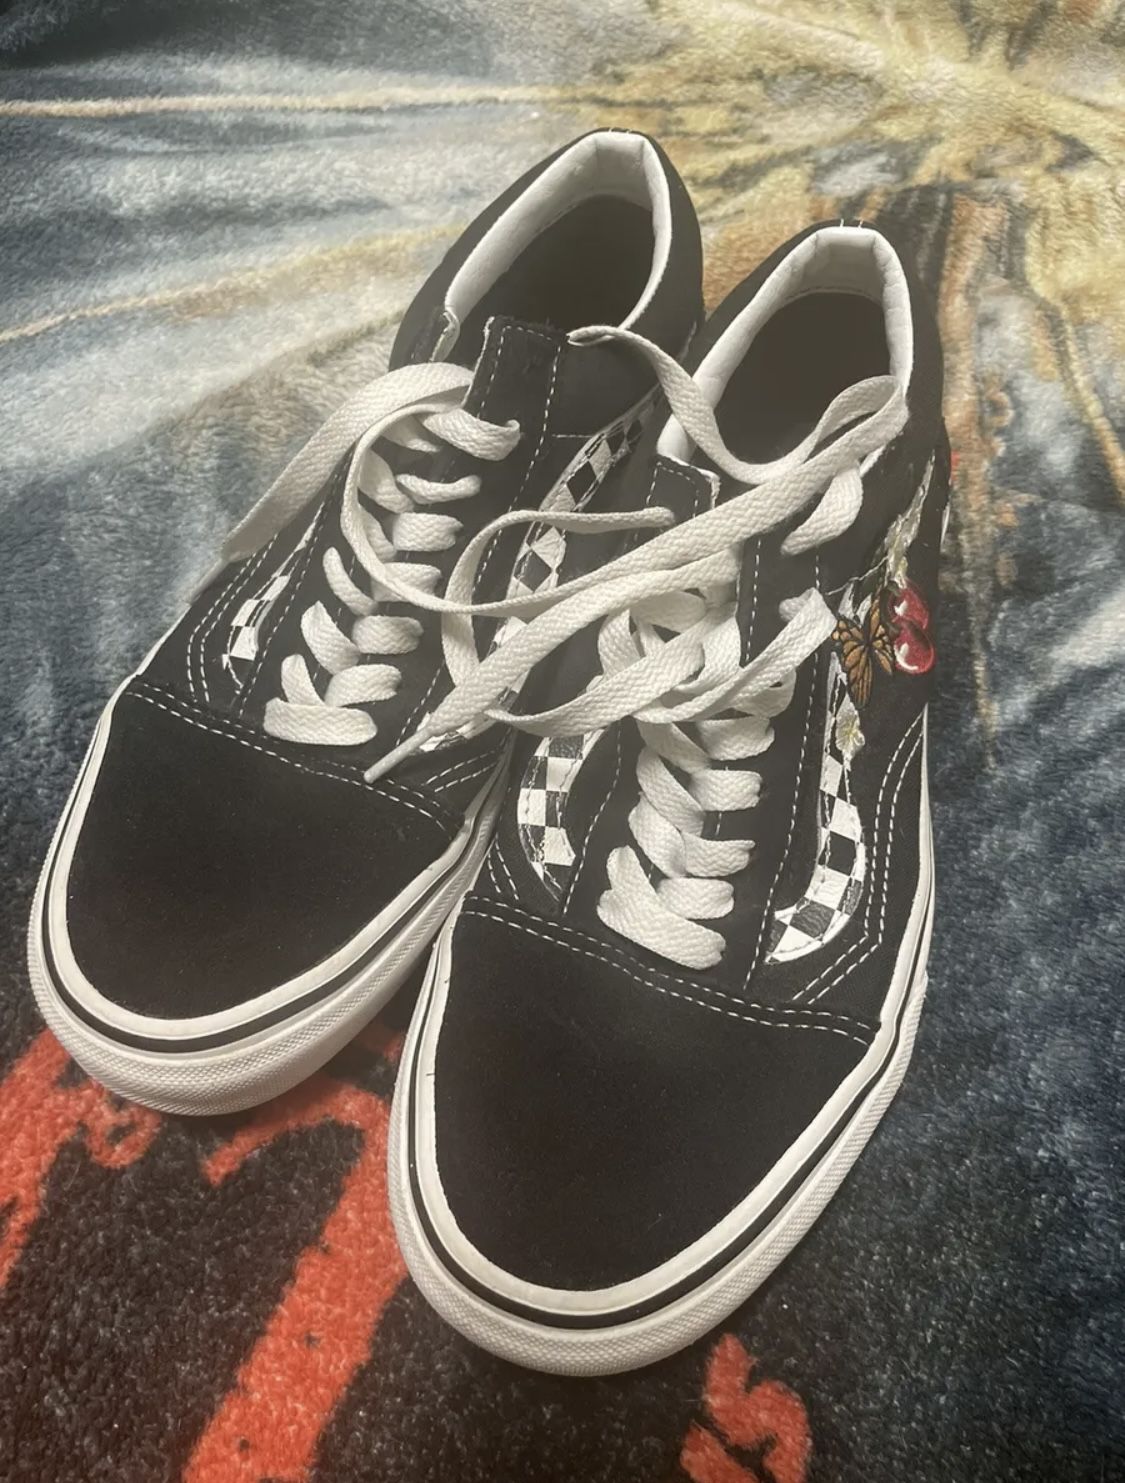 Dårlig skæbne bypass indsats VANS old School Butterfly Checkered Cherries Skate Shoes Sz 7 M Sz 8.5 W  for Sale in Woonsocket, RI - OfferUp